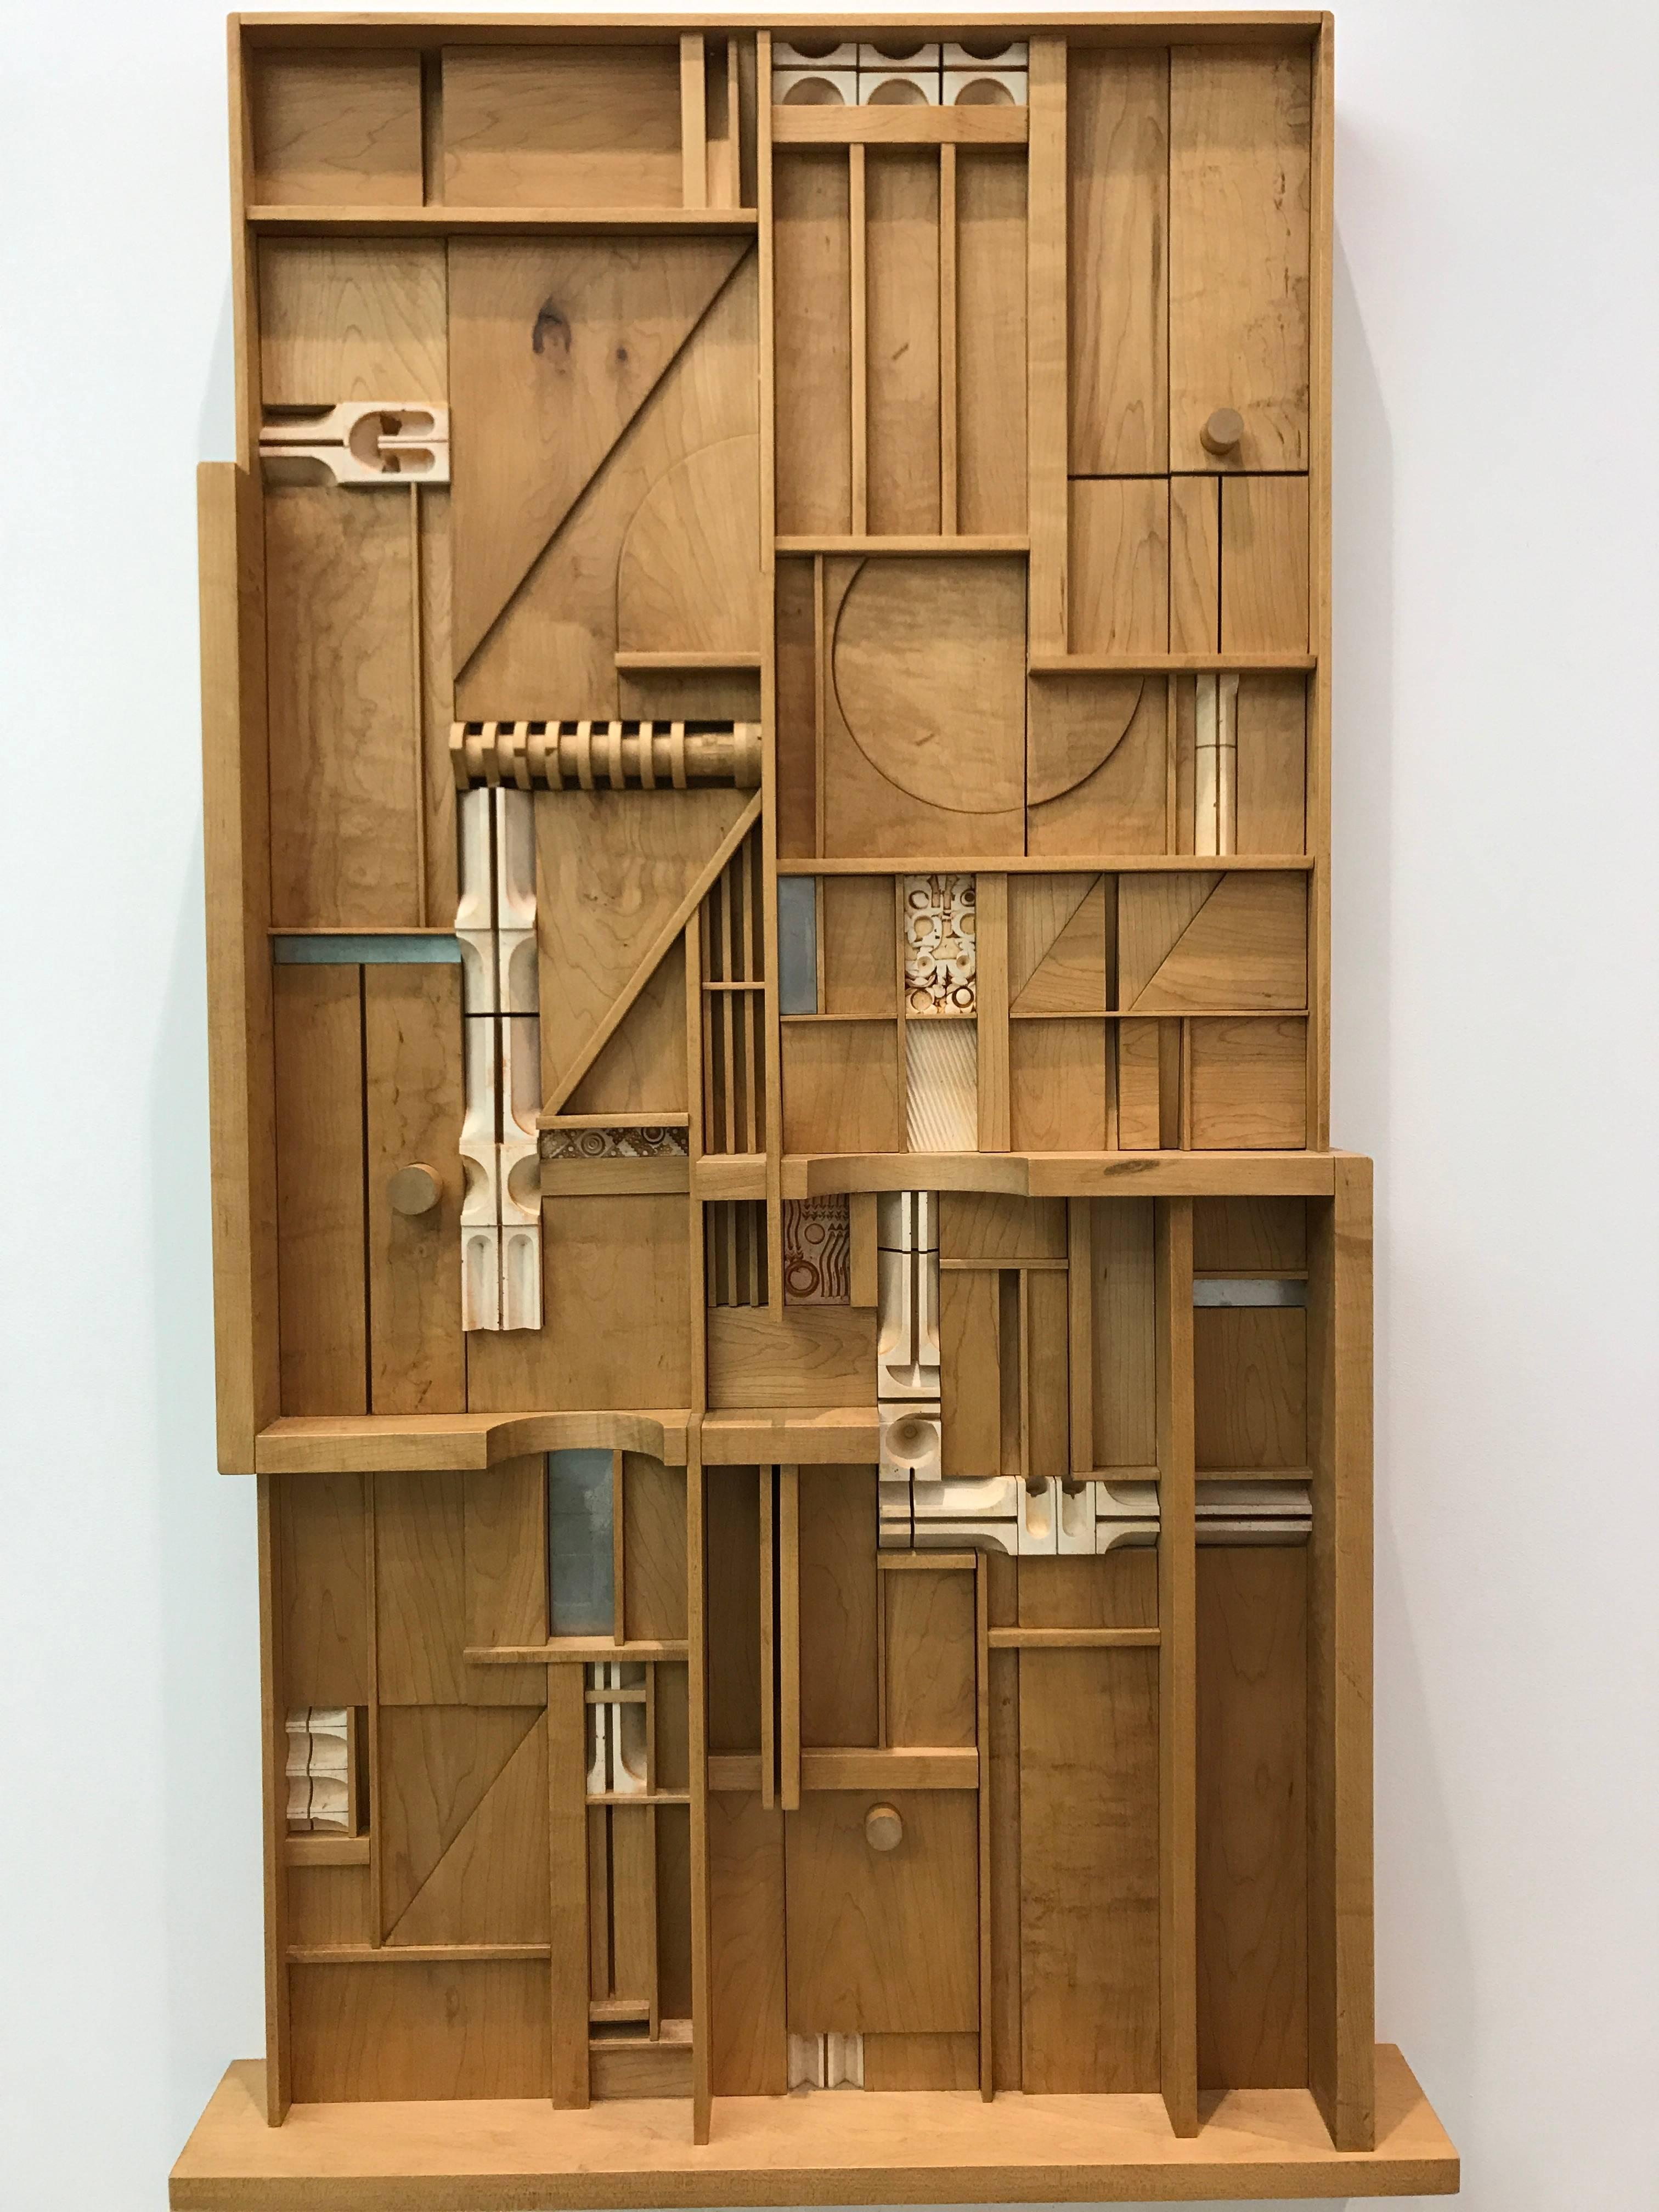 Mid-century modern art and design. This wood assemblage is composed of wood, metal, polyester resin that the artist reassembled into a new composition. 

The artist sourced the wood directly from a lumberyard, and it's a hard rock maple wood that